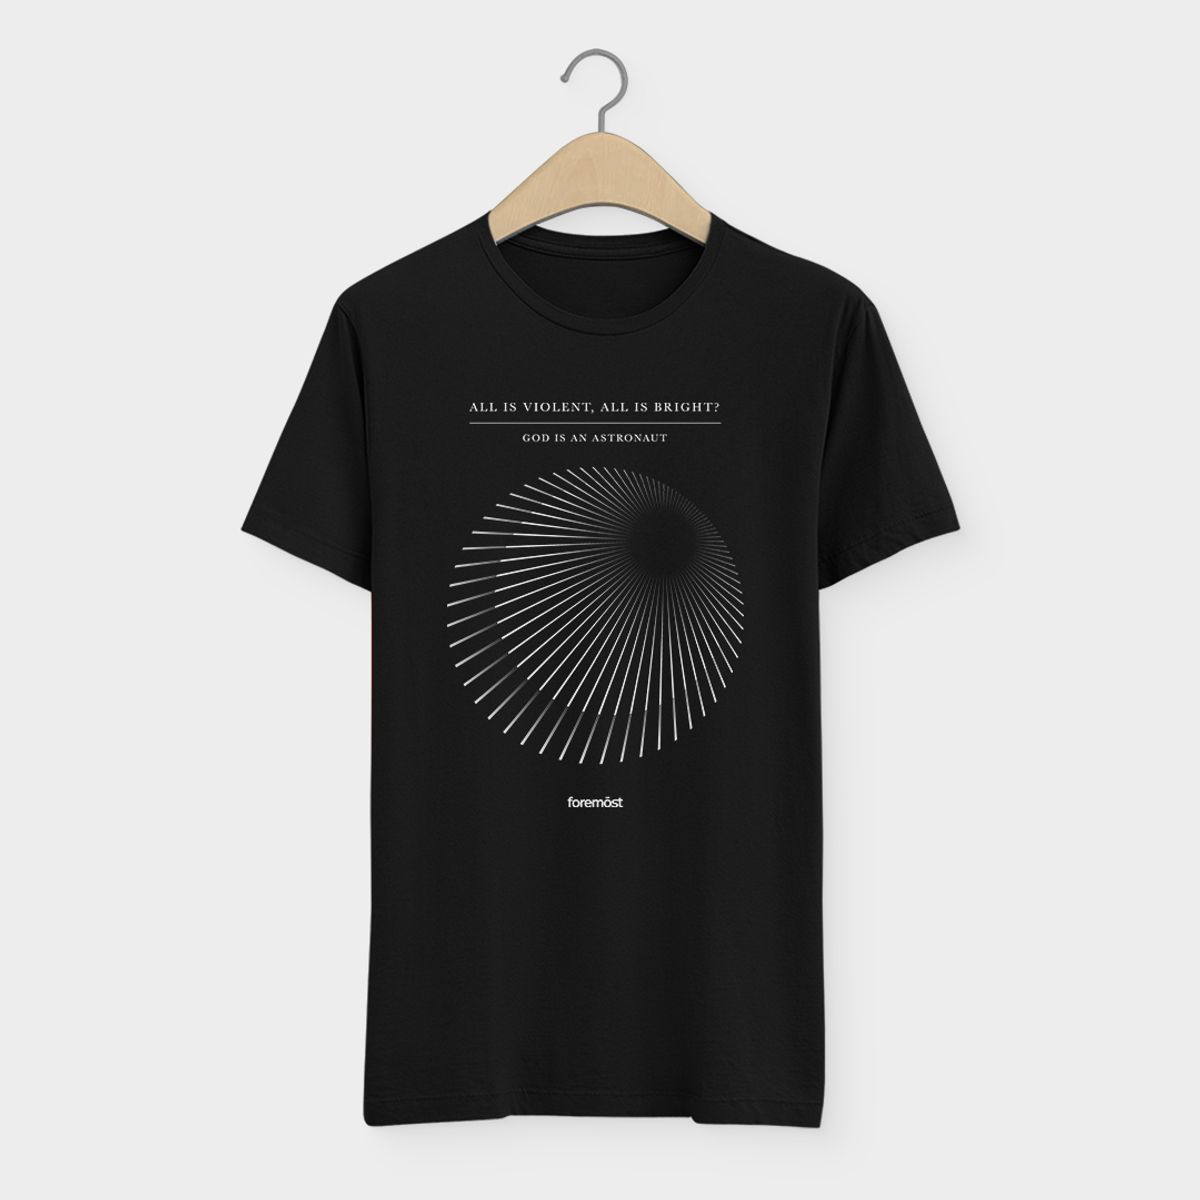 Nome do produto: Camiseta God Is An Astronaut All is Violent, All is Bright Post Rock 